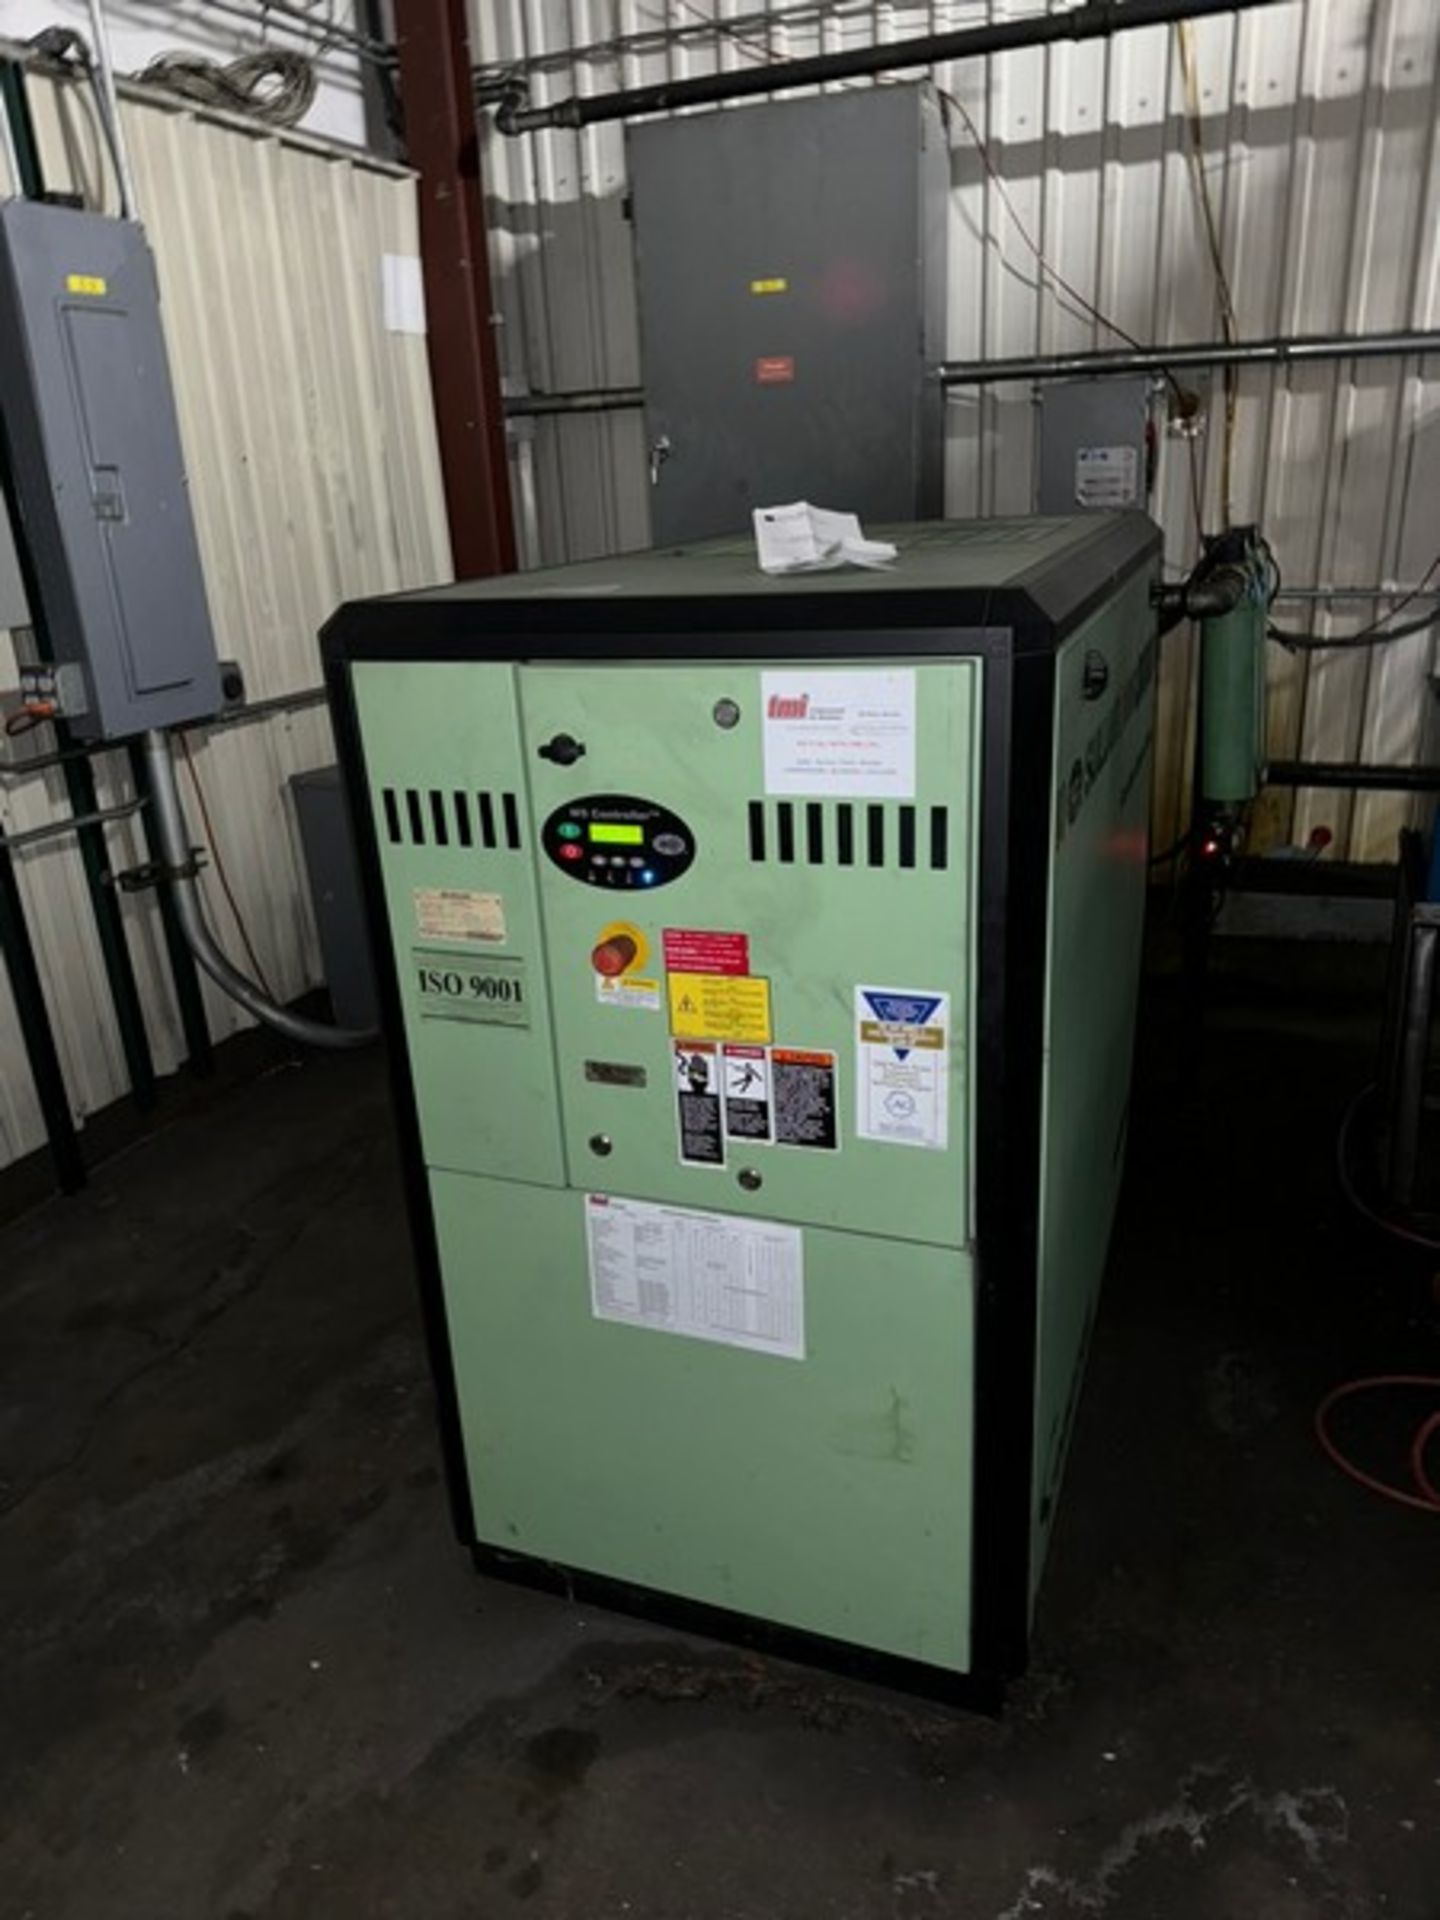 2014 Sullair Air Compressor, M/N 3009VD AC, S/N 201407160089, 125 PSI 167 CFM, with Integral Dryer - Image 3 of 6